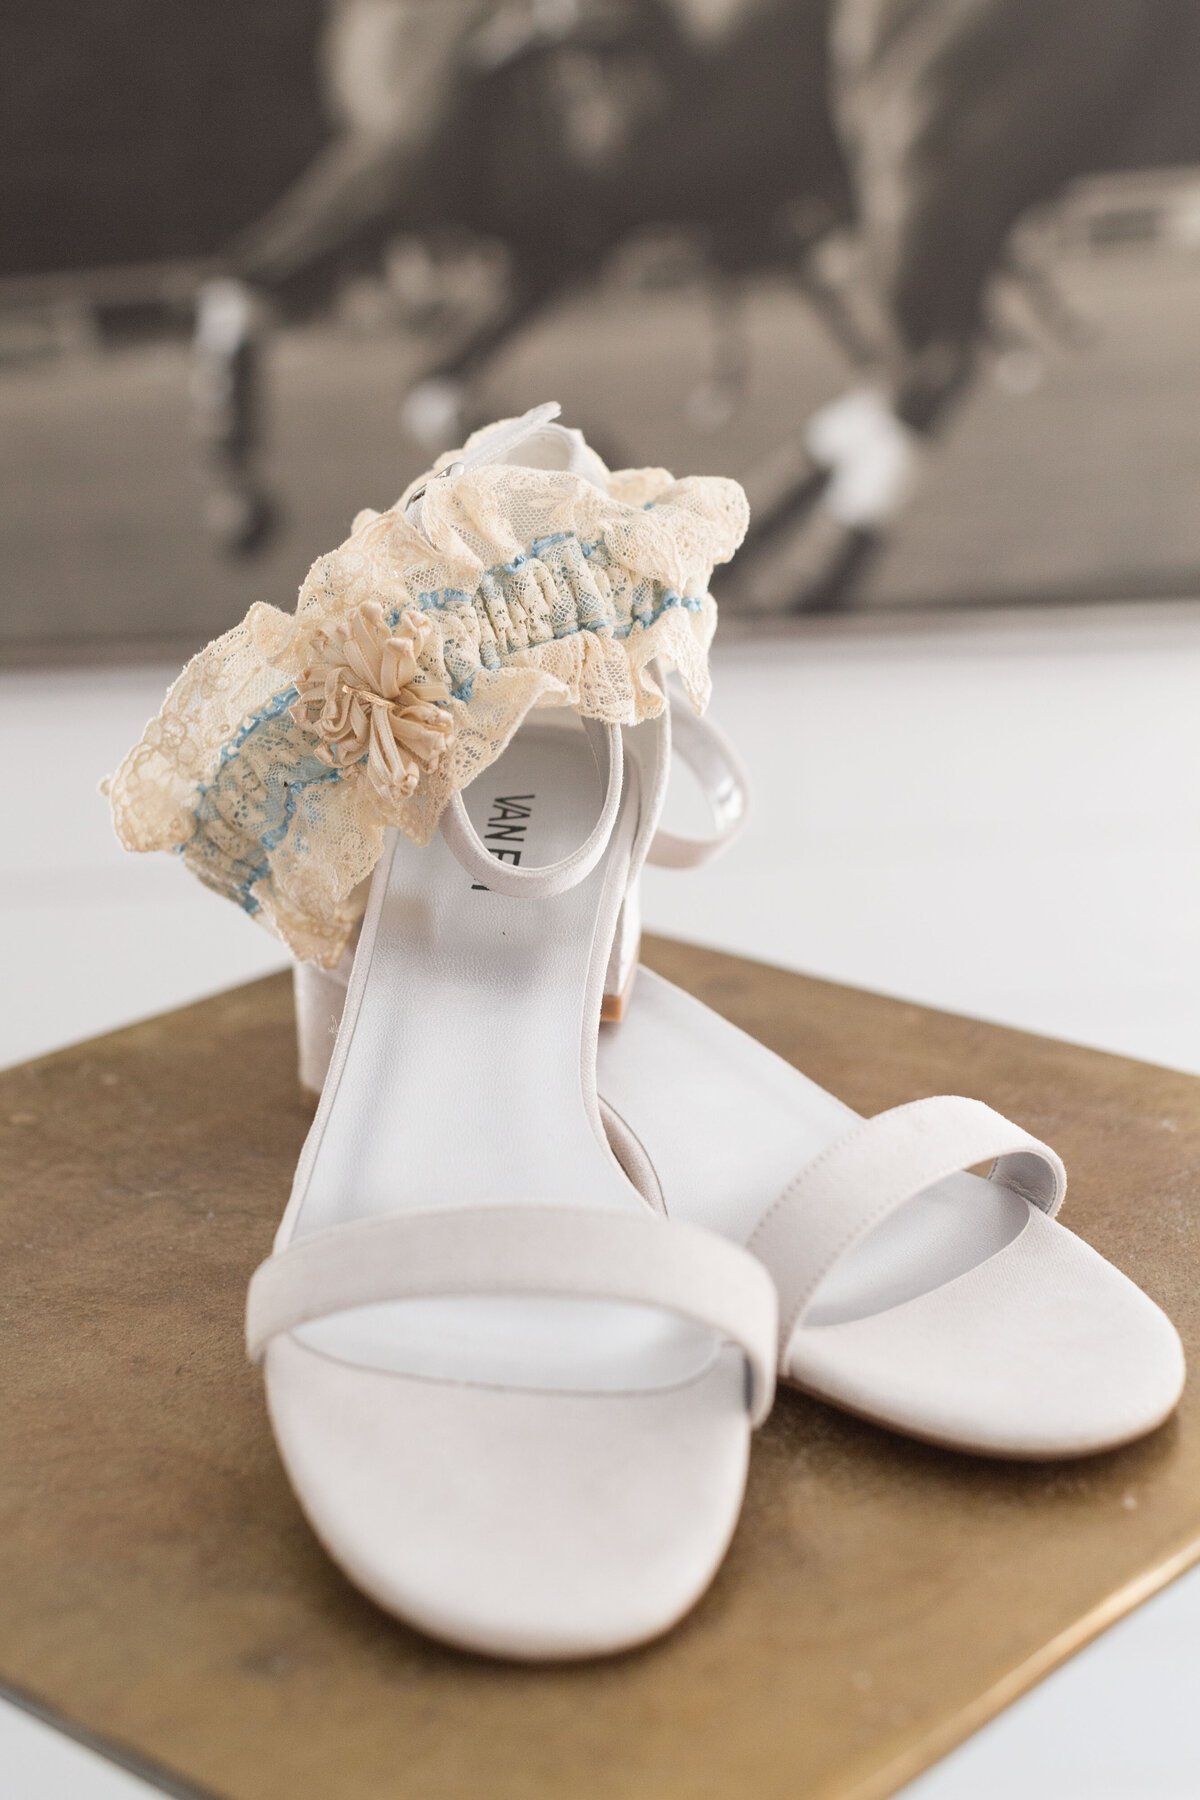 Detail photo of the brides shoes and garter to be worn on her wedding day.